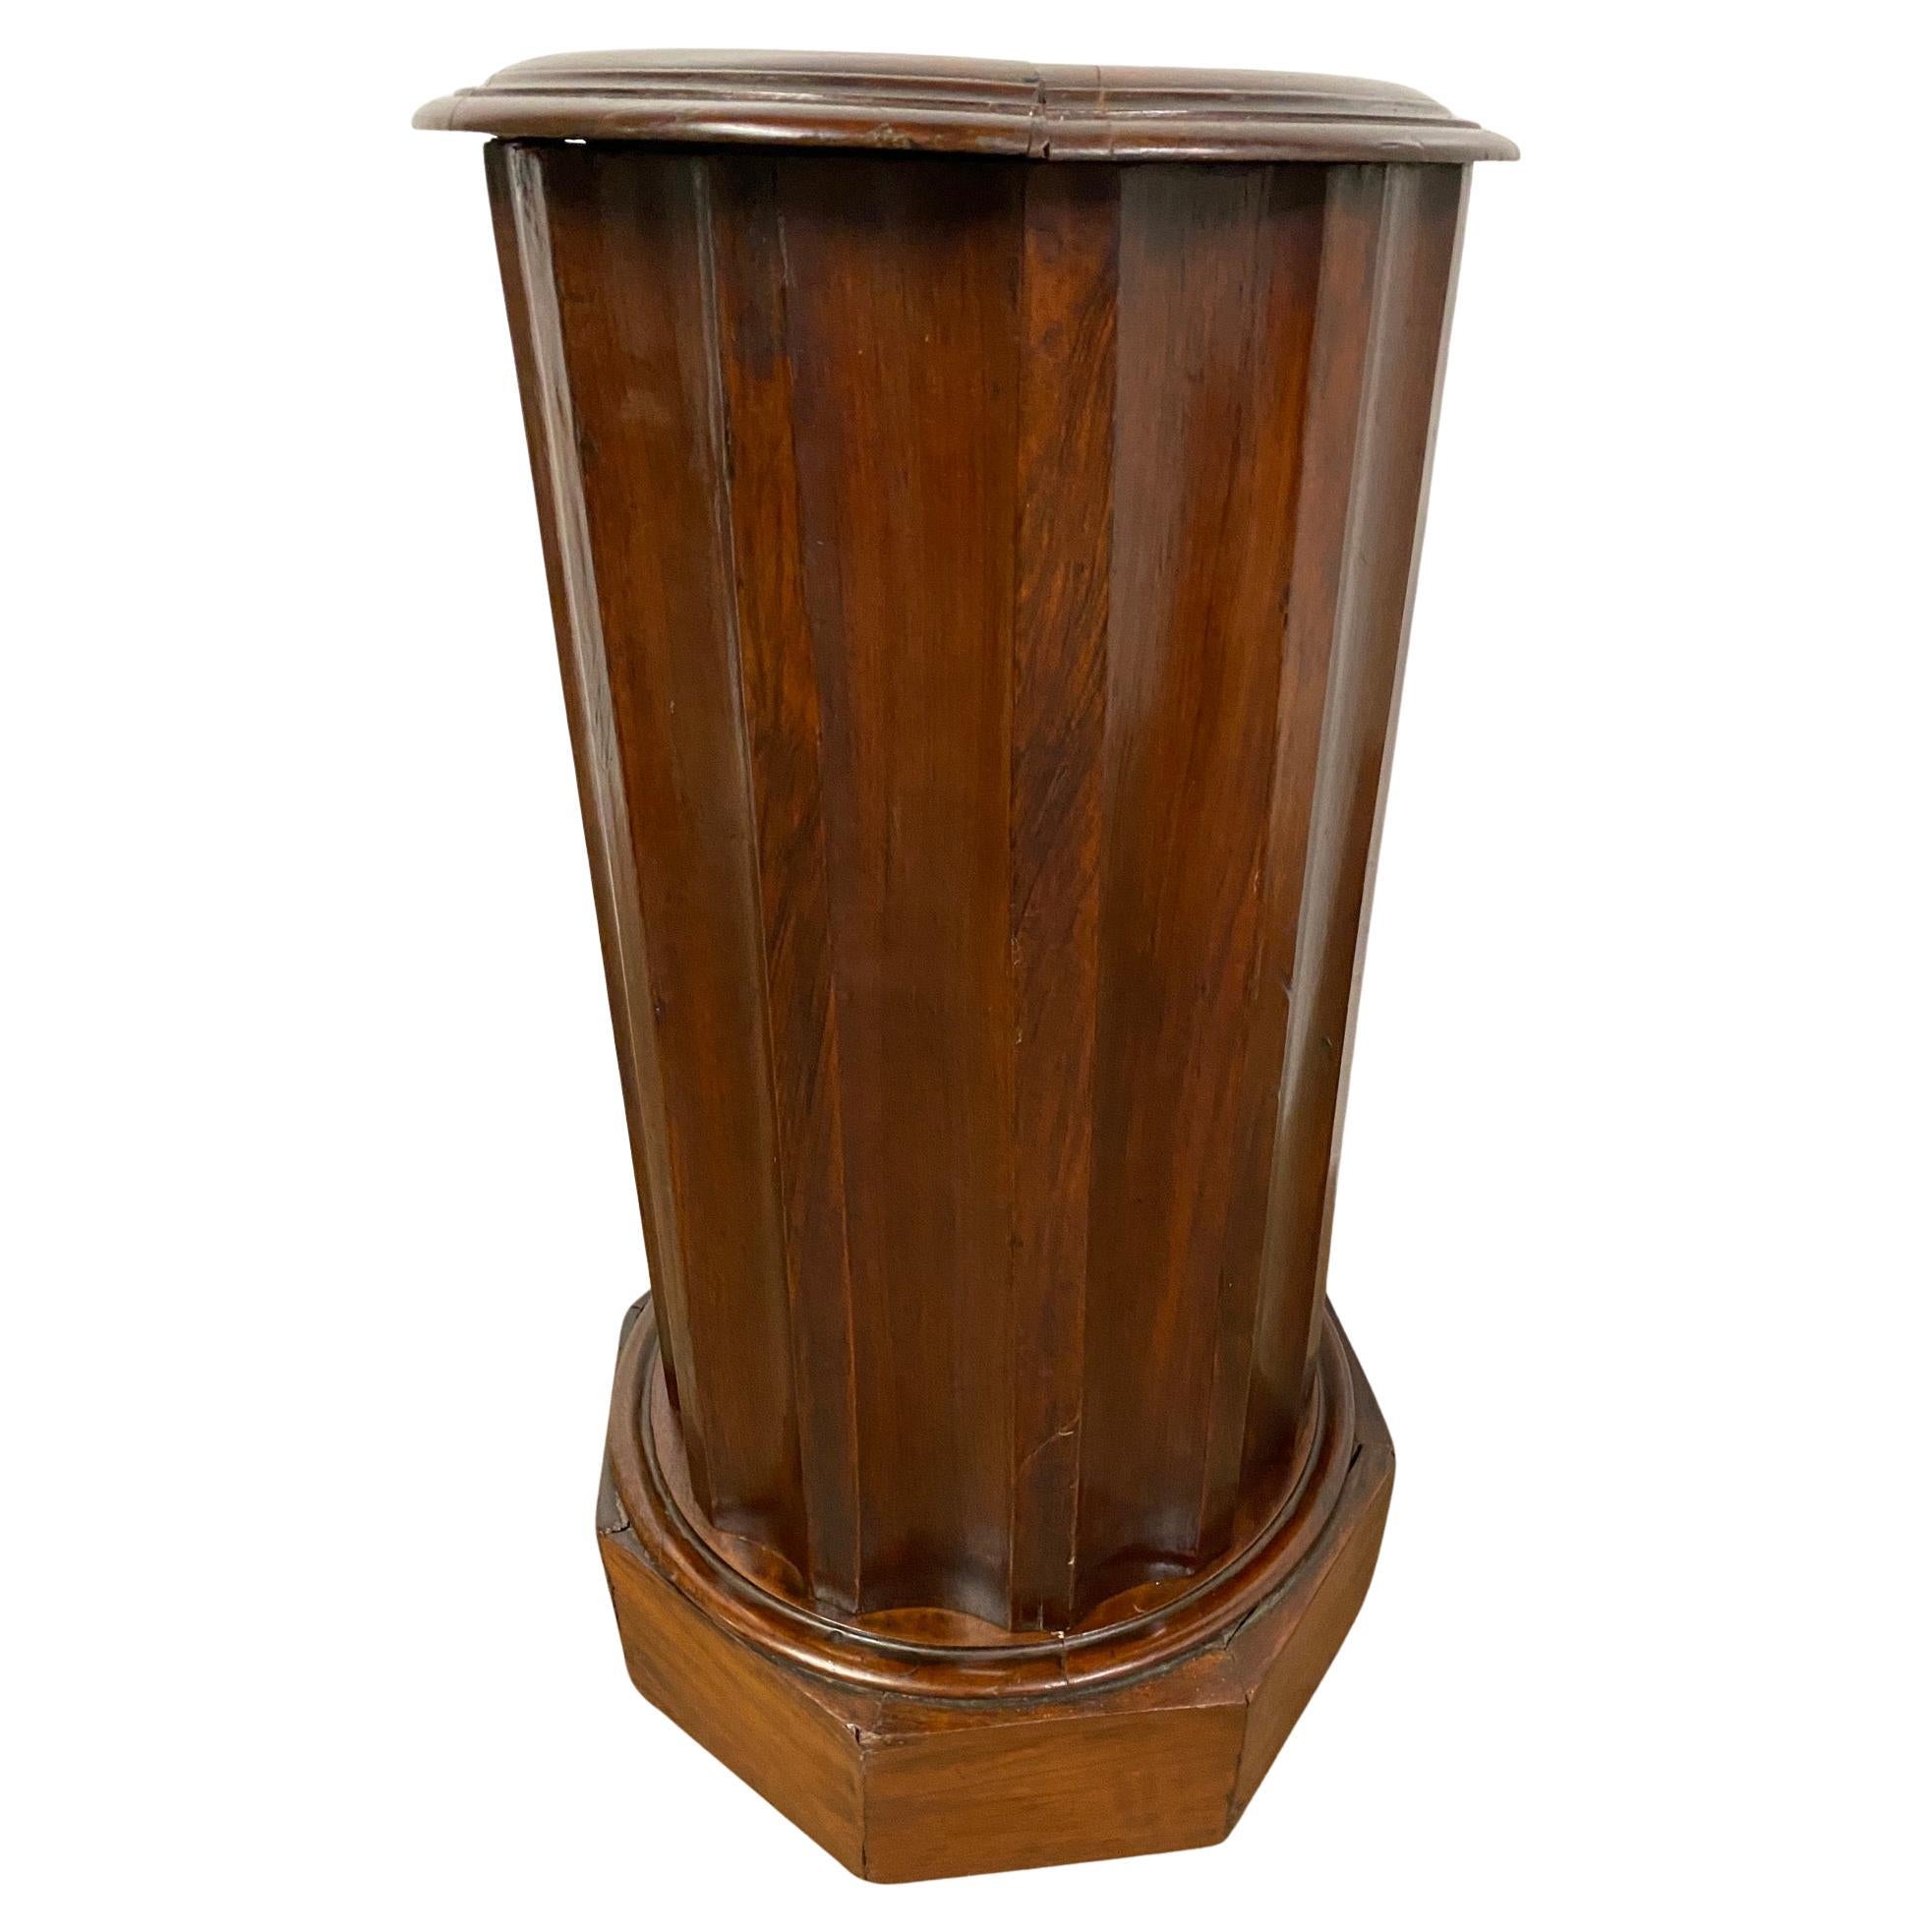 19th C. slender fluted cylindrical pedestal mahogany cabinet with marble inset top. Latch on door opens to interior shelving for storage. Can be used as a side table, end table, occasional table, bedside table.
     